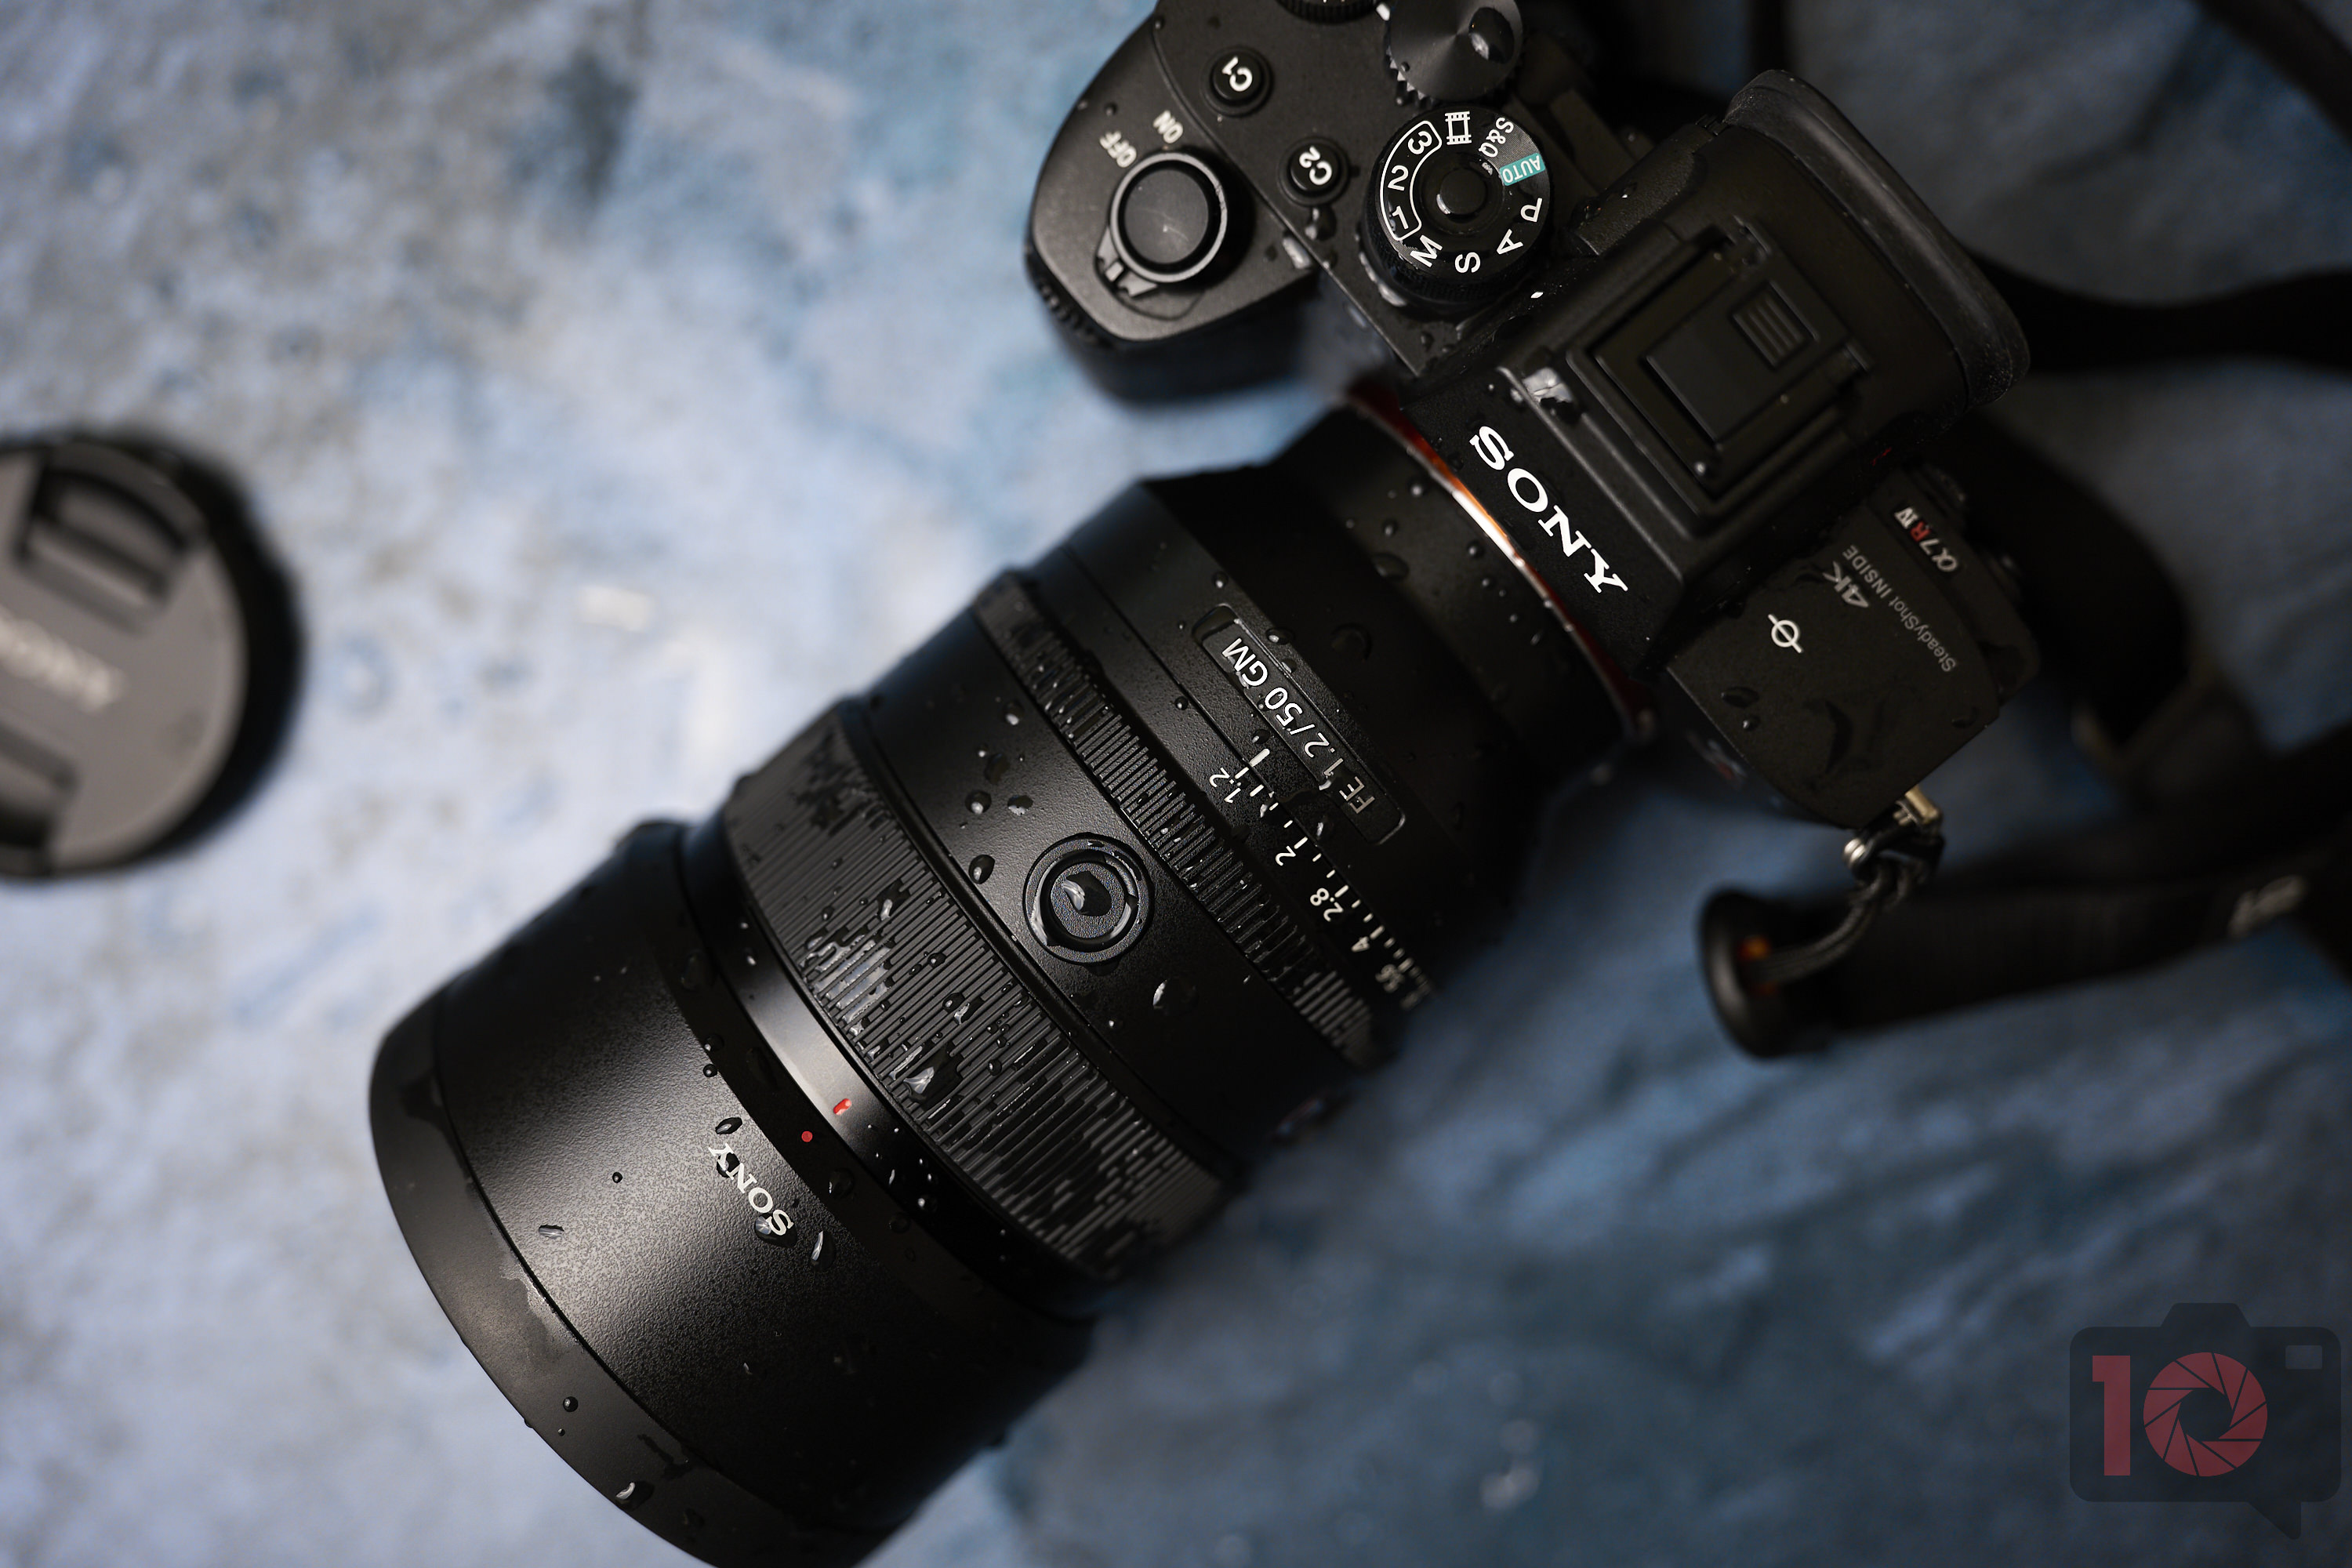 Chris Gampat The Phoblographer Sony 50mm f1.2 G Master review product photos 21-50s400 10